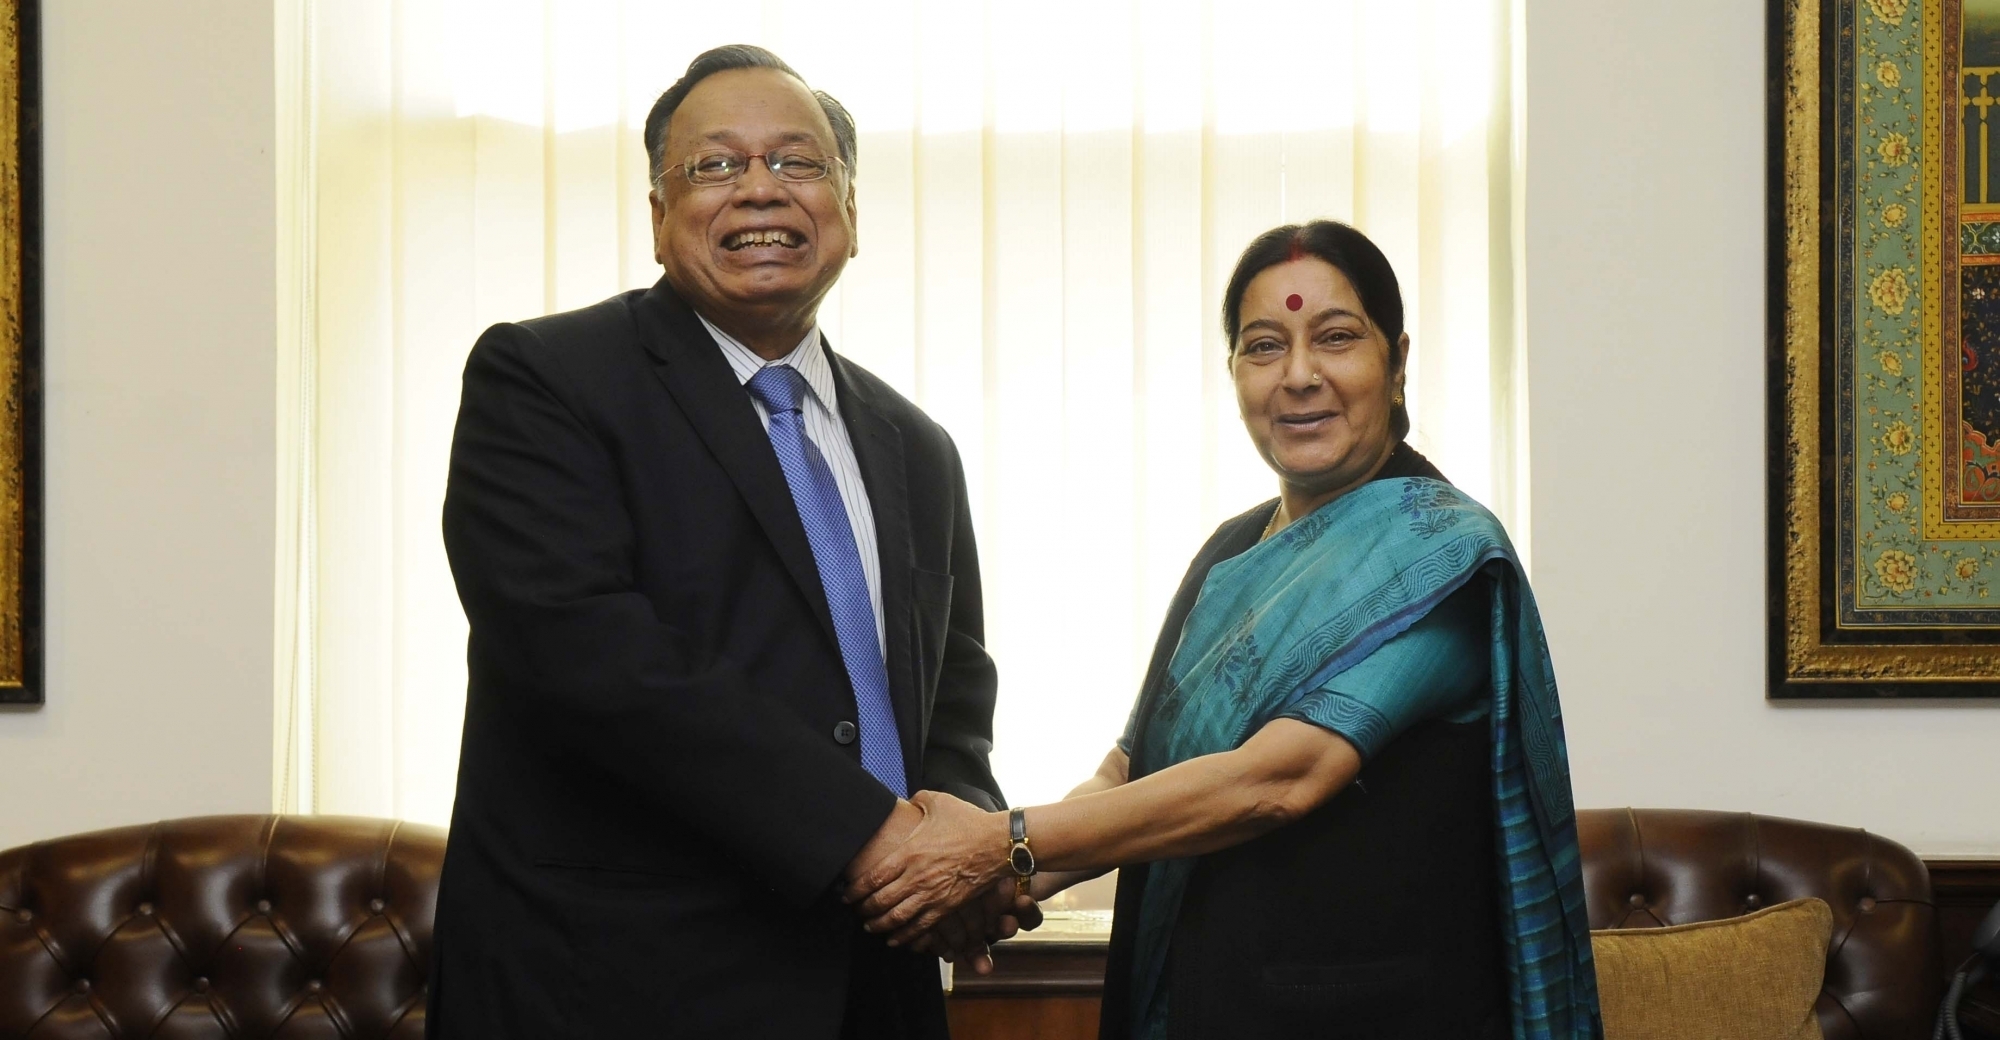 External Affairs Minister Sushma Swaraj meets Bangladesh Foreign Minister Abul Hassan Mahmud Ali in New Delhi, on March 2, 2016.